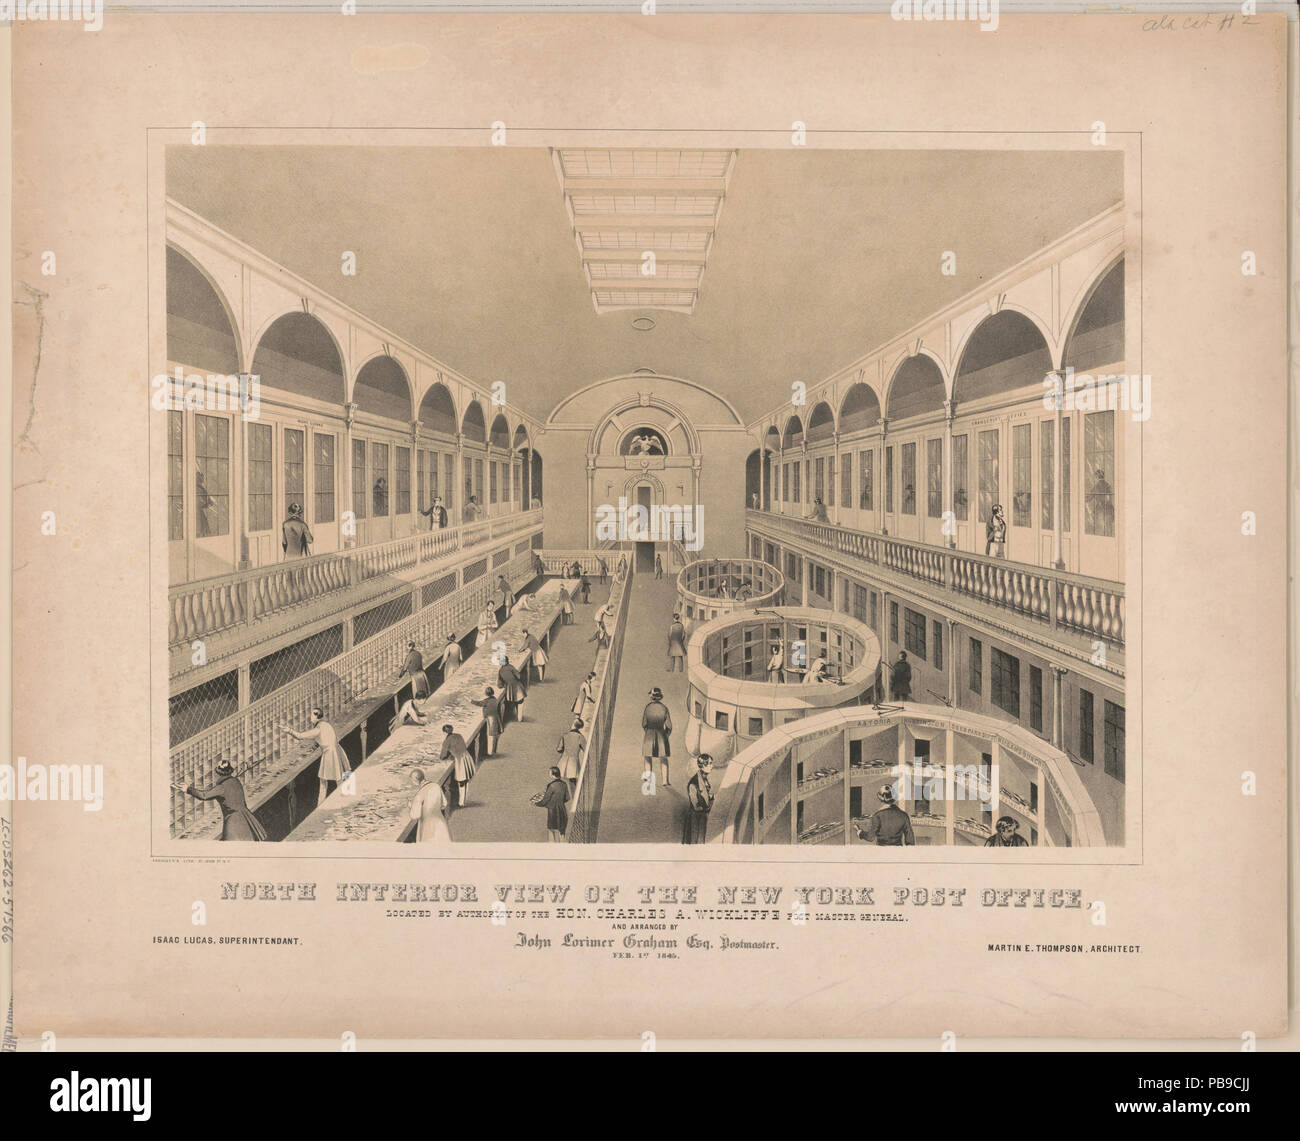 1117 North interior view of the New York post office, located by authority of the Hon. Charles A. Wickliffe Post Master General and arranged by John Lorimer Graham Esq. Postmaster, Feb. 1st 1845 LCCN2003664205 Stock Photo